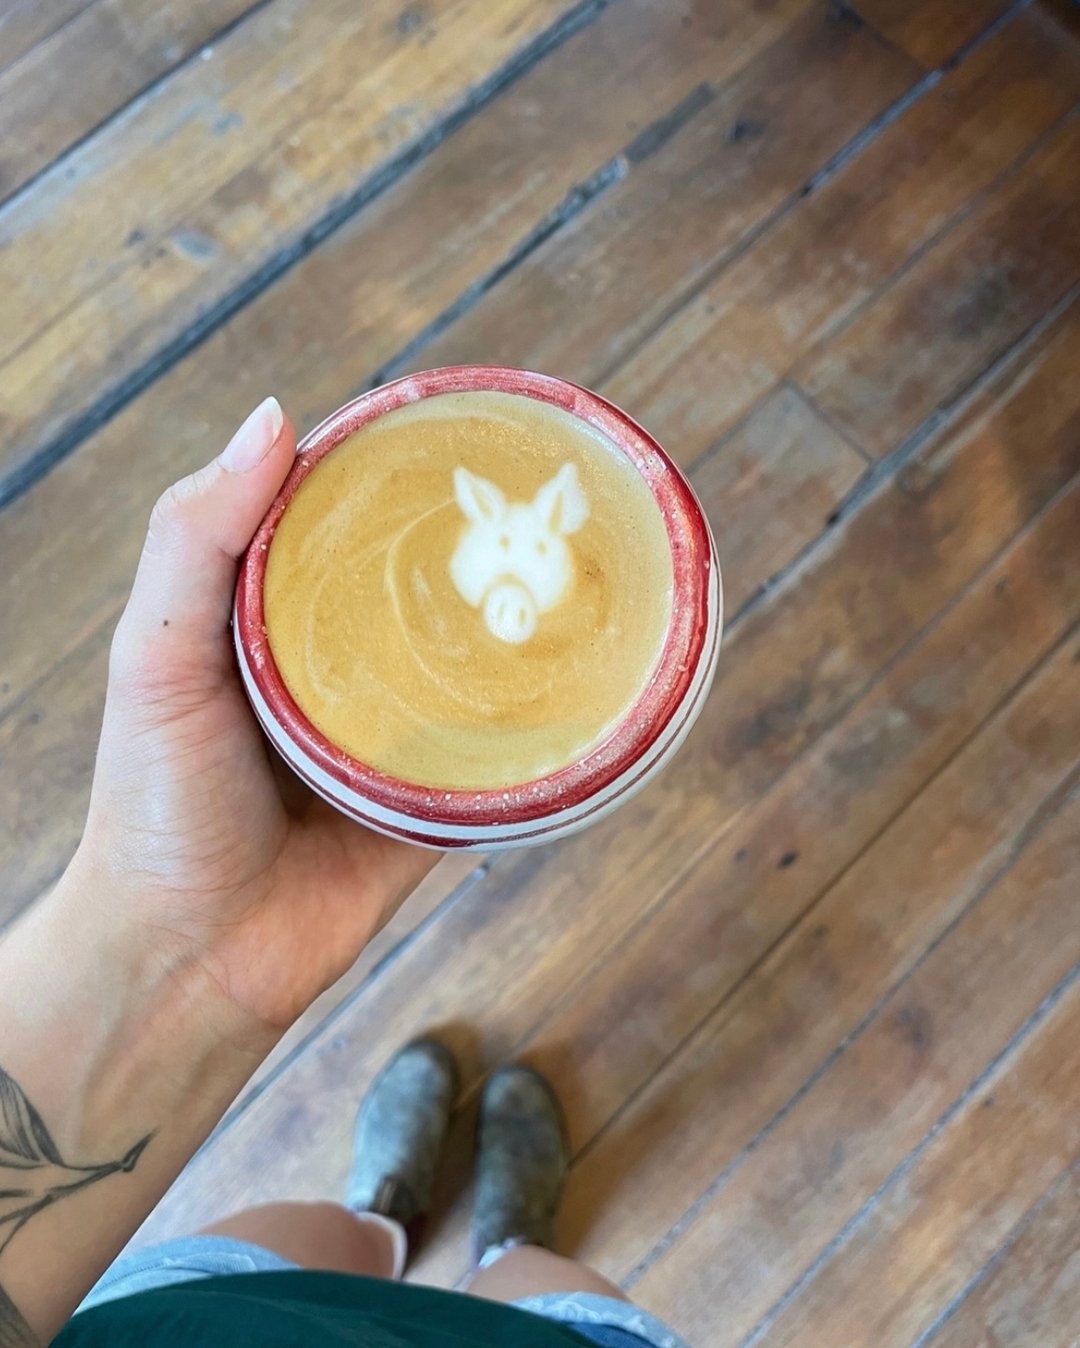 Ella has been working on her latte art, next time you&rsquo;re in challenge her to make you a farm animal 🐷​​​​​​​​​

.

#farmerandco #chestercountypa #unionville #kennettsquarepa #westchesterpa #philly #brandywinevalleypa #avondale #oxfordpa #local